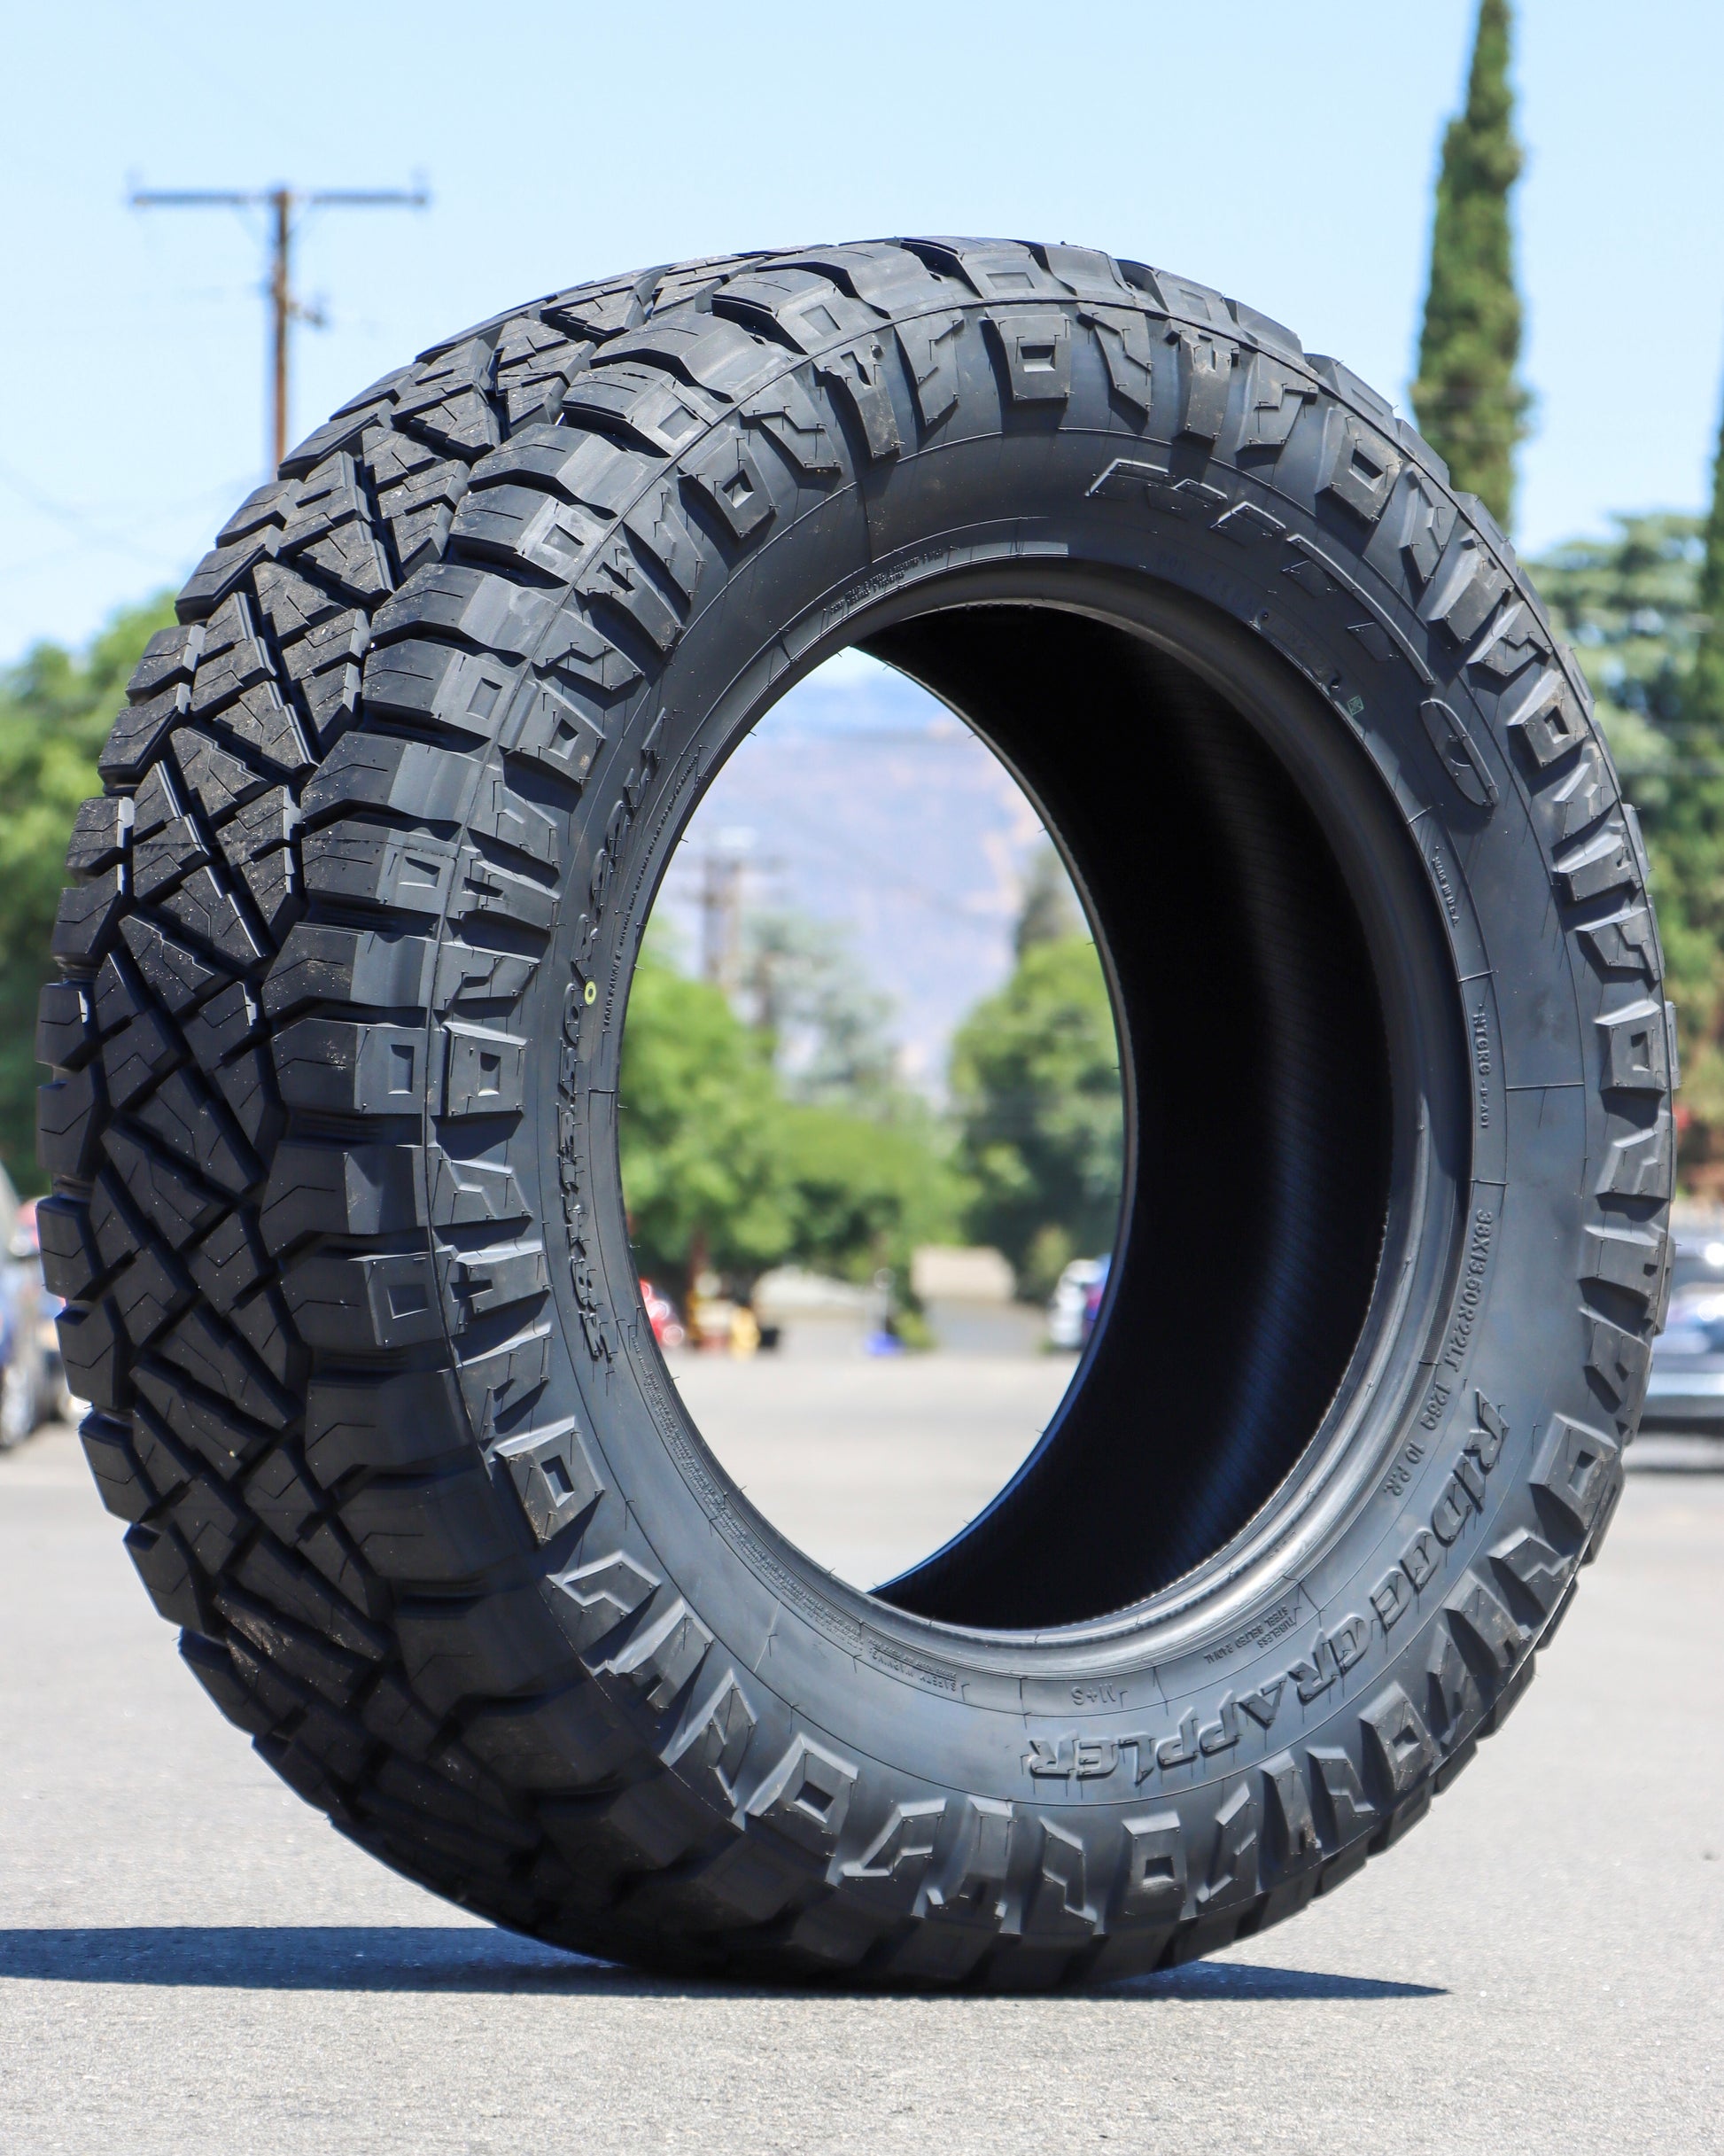 Nitto ridge grappler tire sitting in the middle of the street with the mountains and trees in the background. 